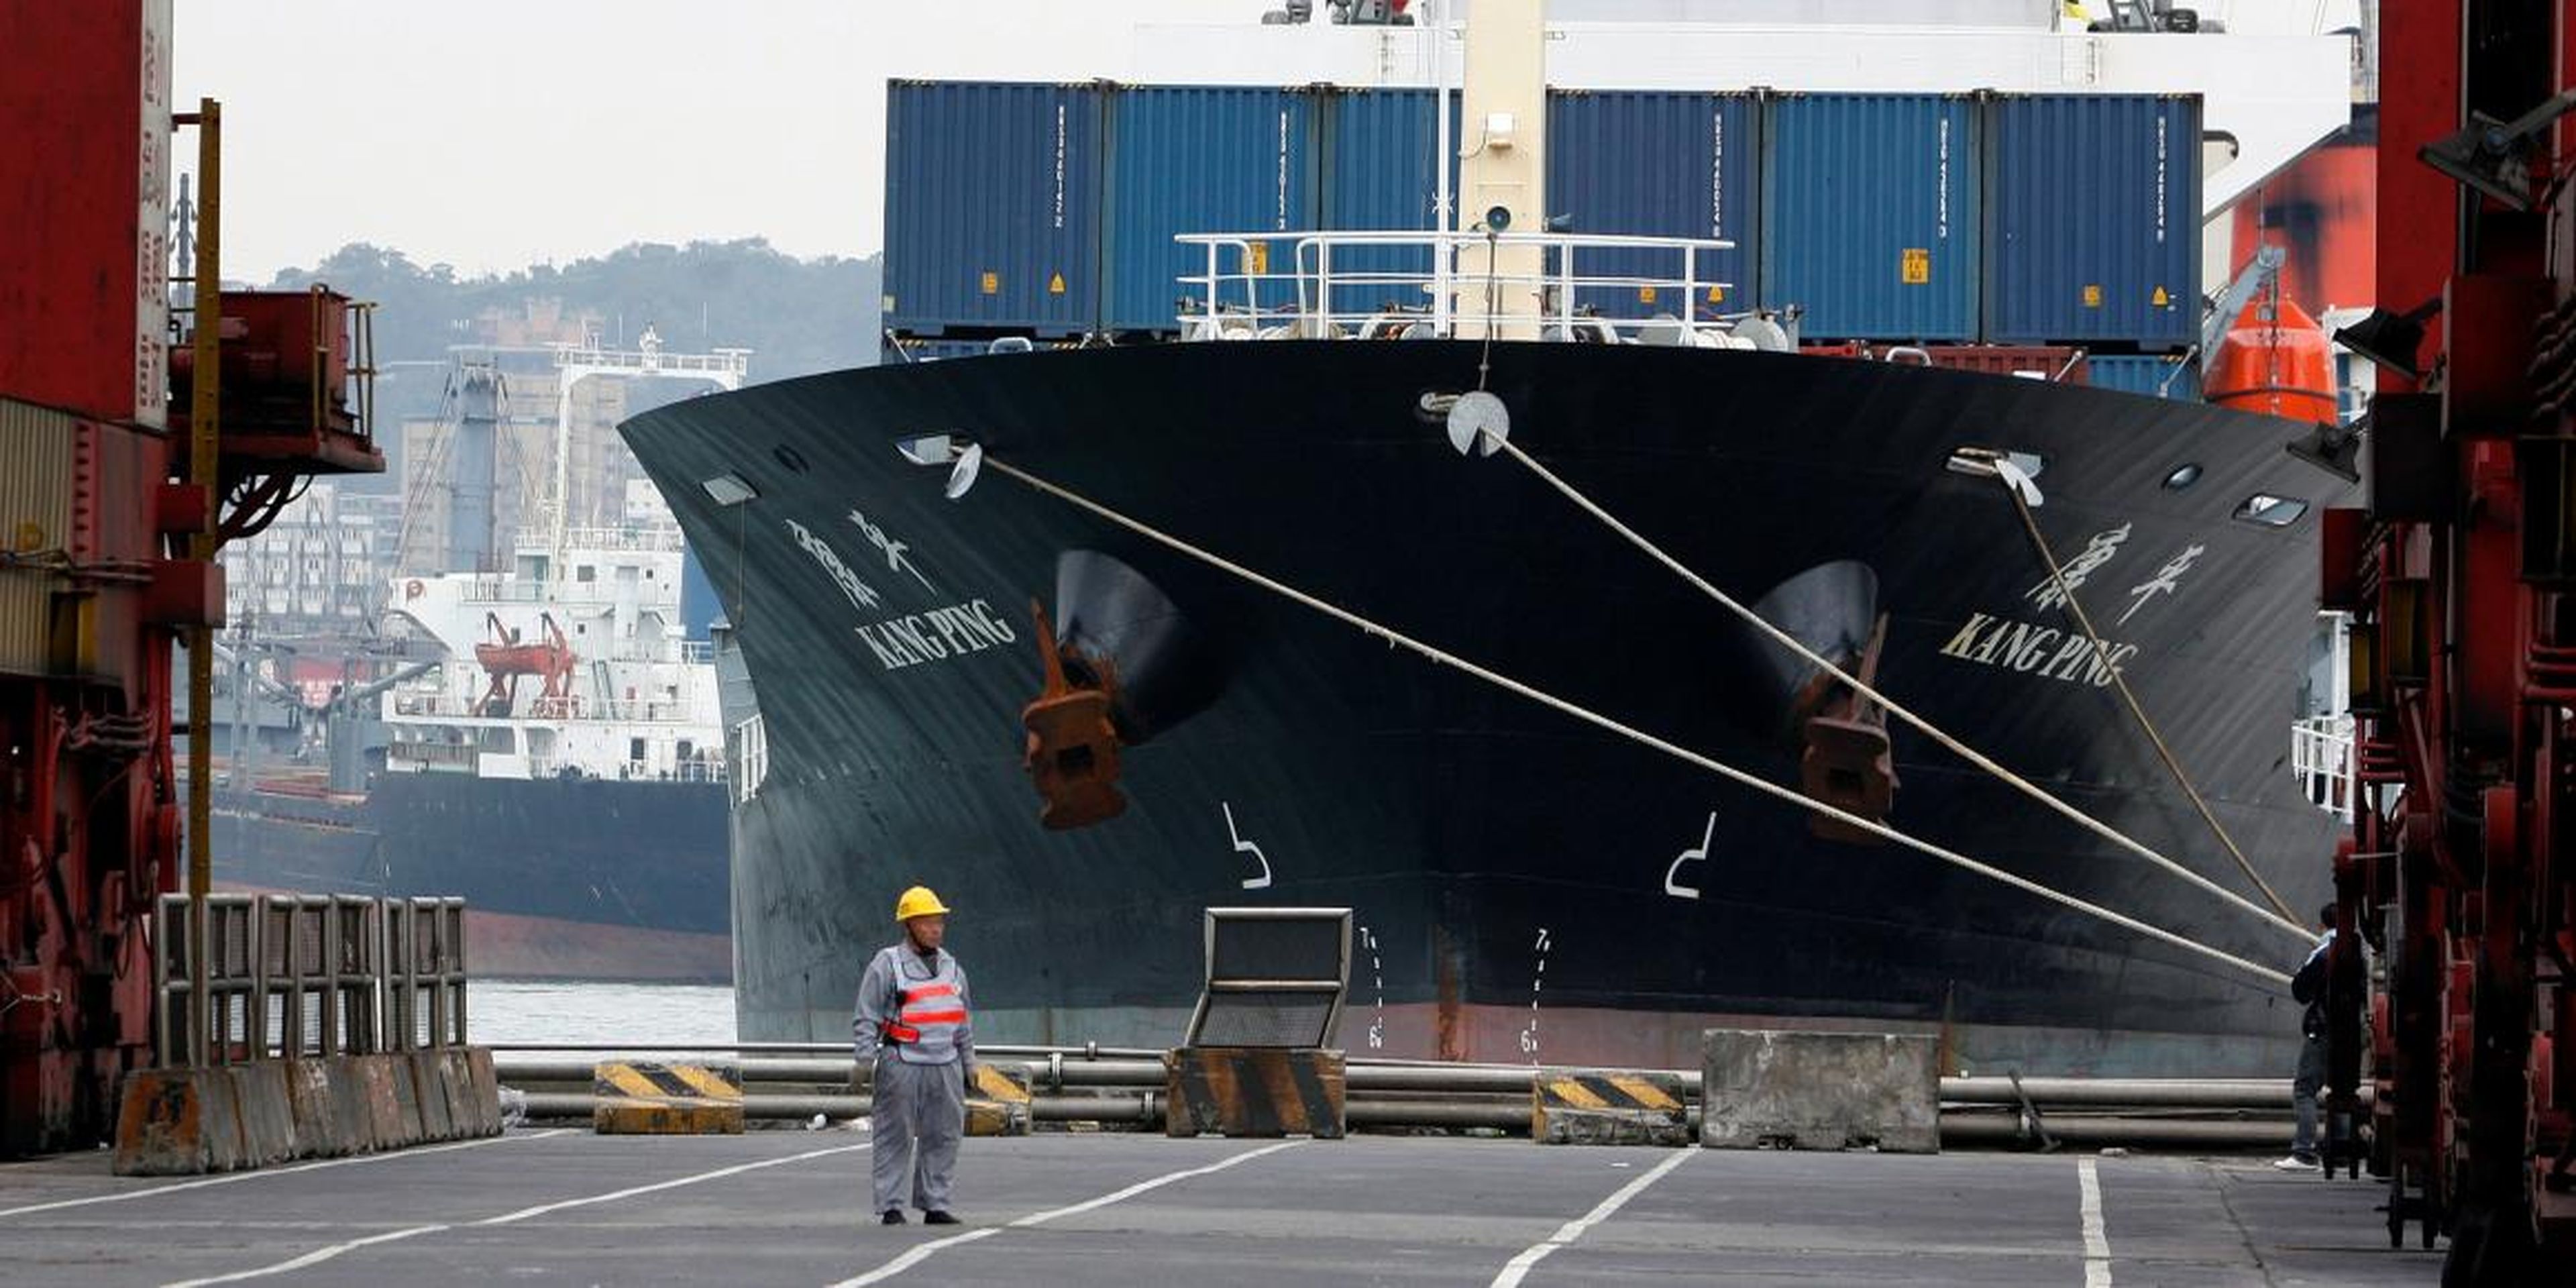 A man stands in front of a cargo ship at a port in the northern Taiwan city of Keelung December 15, 2008.